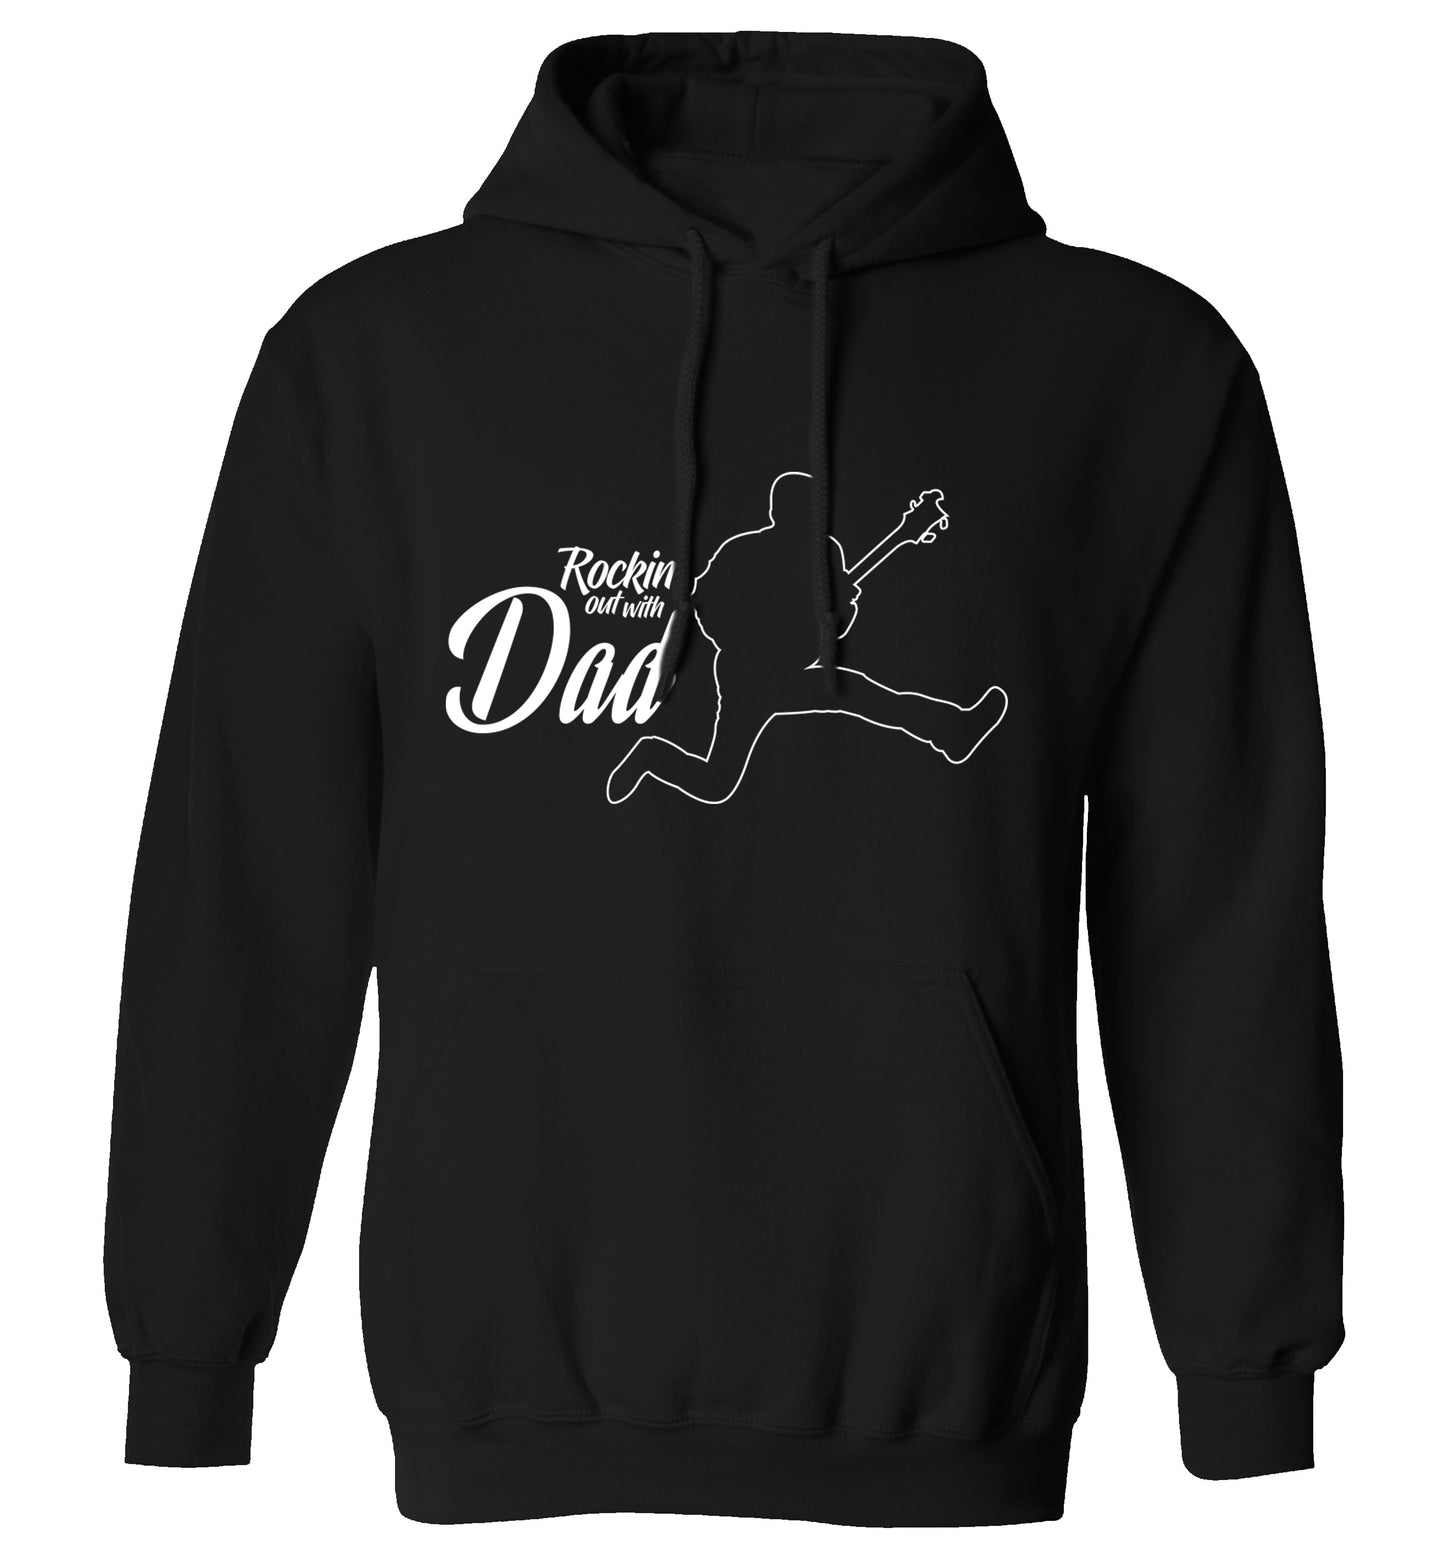 Rockin out with dad adults unisex black hoodie 2XL